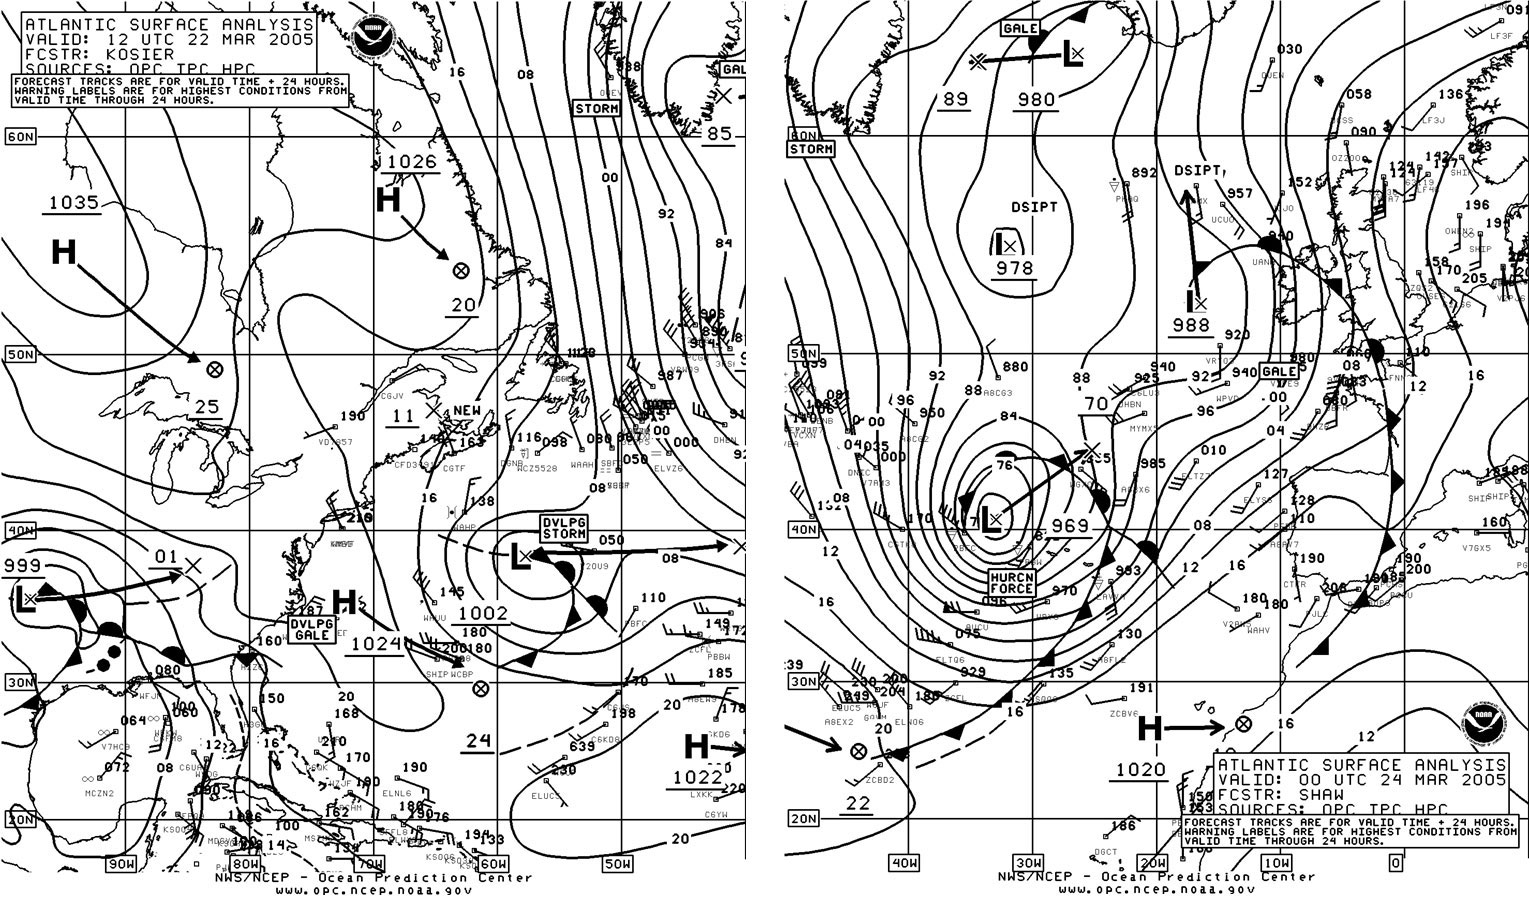 Figure 13. OPC North Atlantic Surface 
Analysis Chart - Click to Enlarge